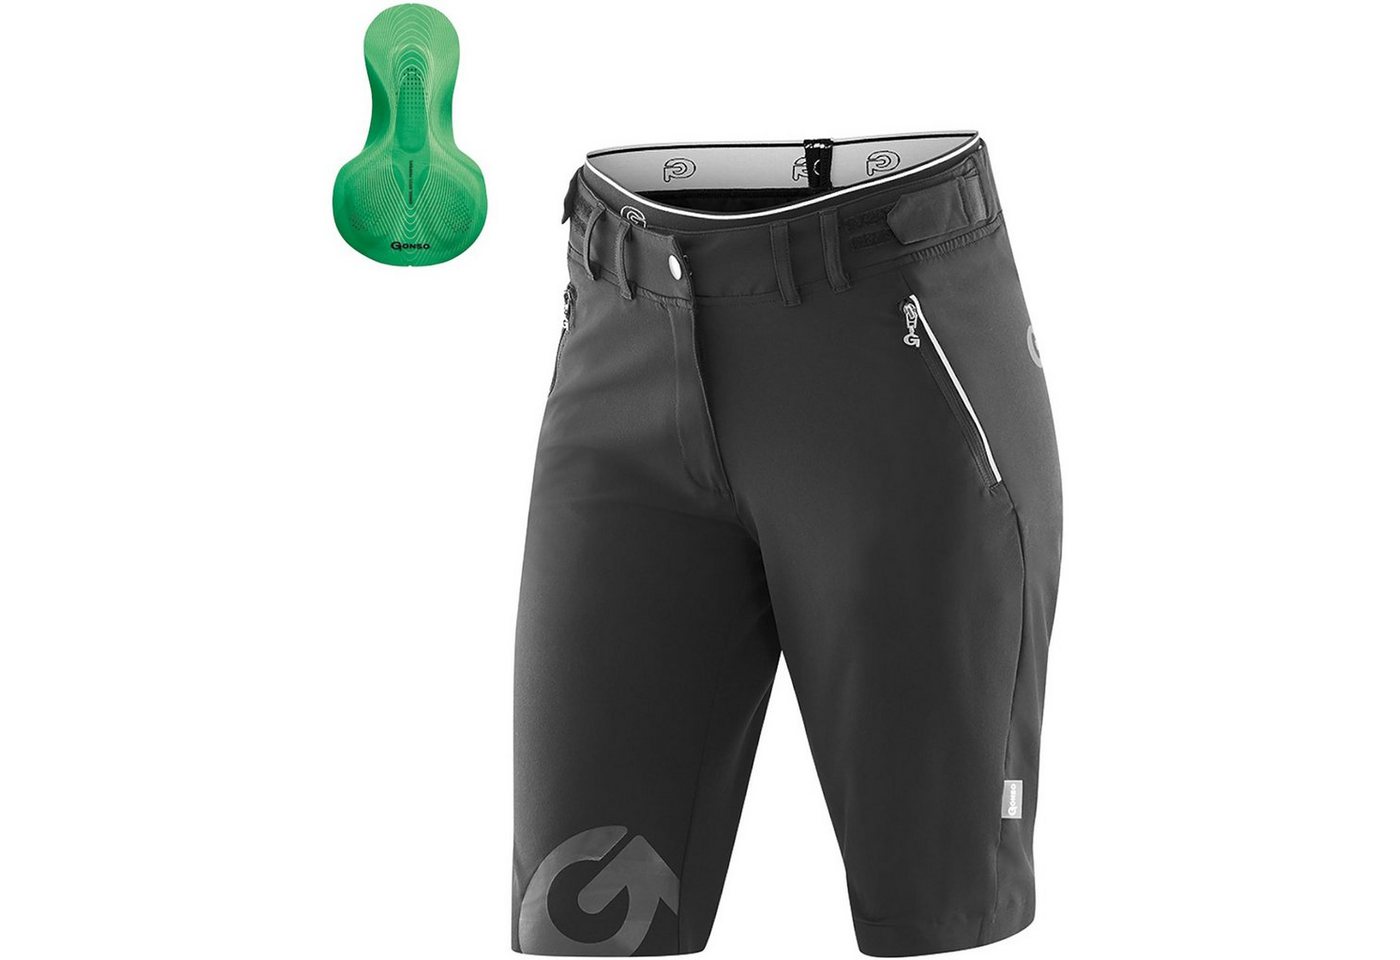 Gonso 2-in-1-Shorts Shorts MTB Sitivo Green von Gonso